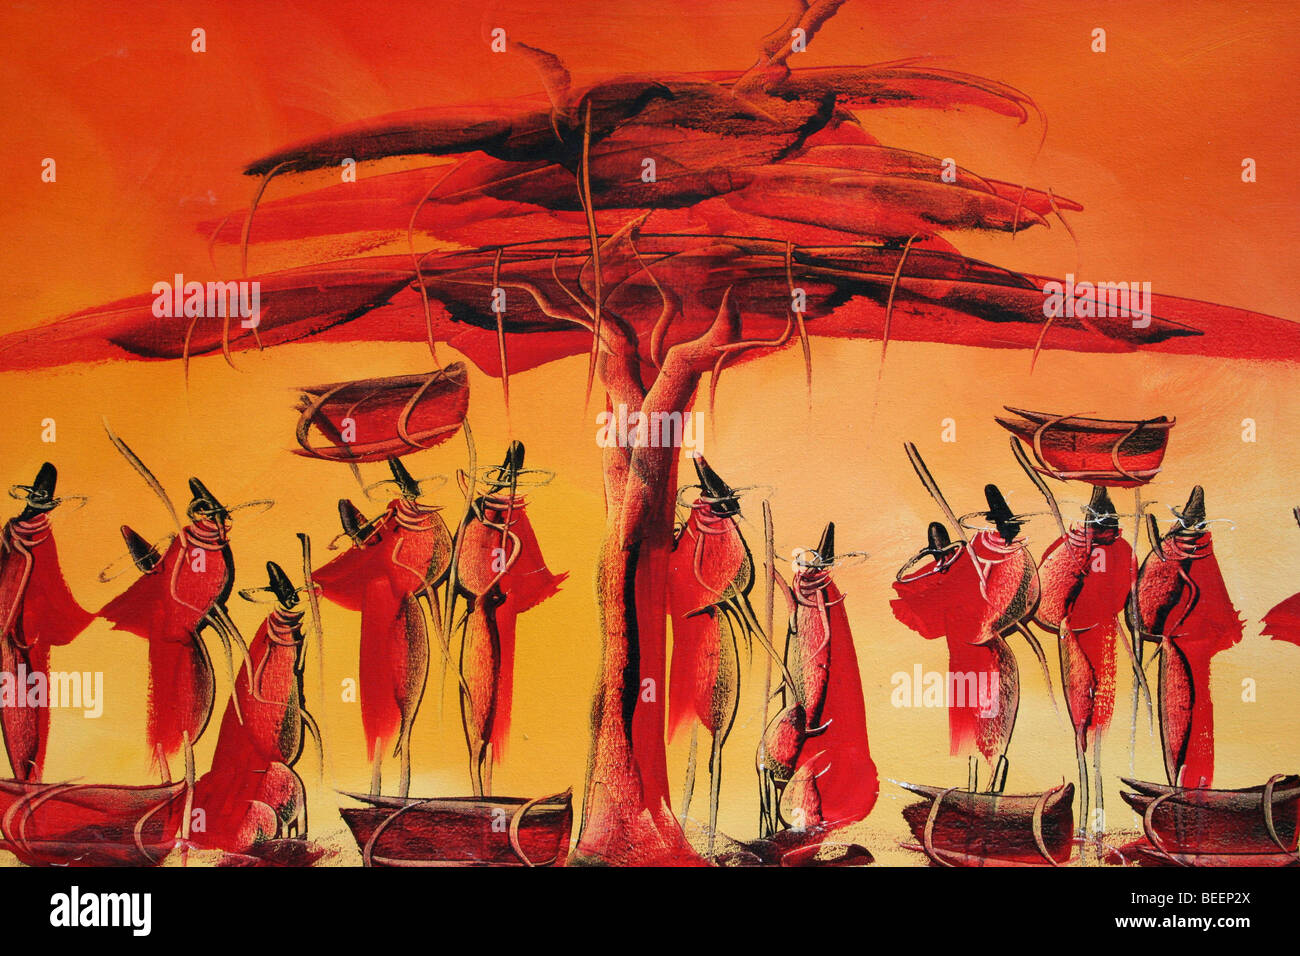 African Painting In Reds And Oranges Showing Masai Tribespeople Under Acacia Tree Stock Photo